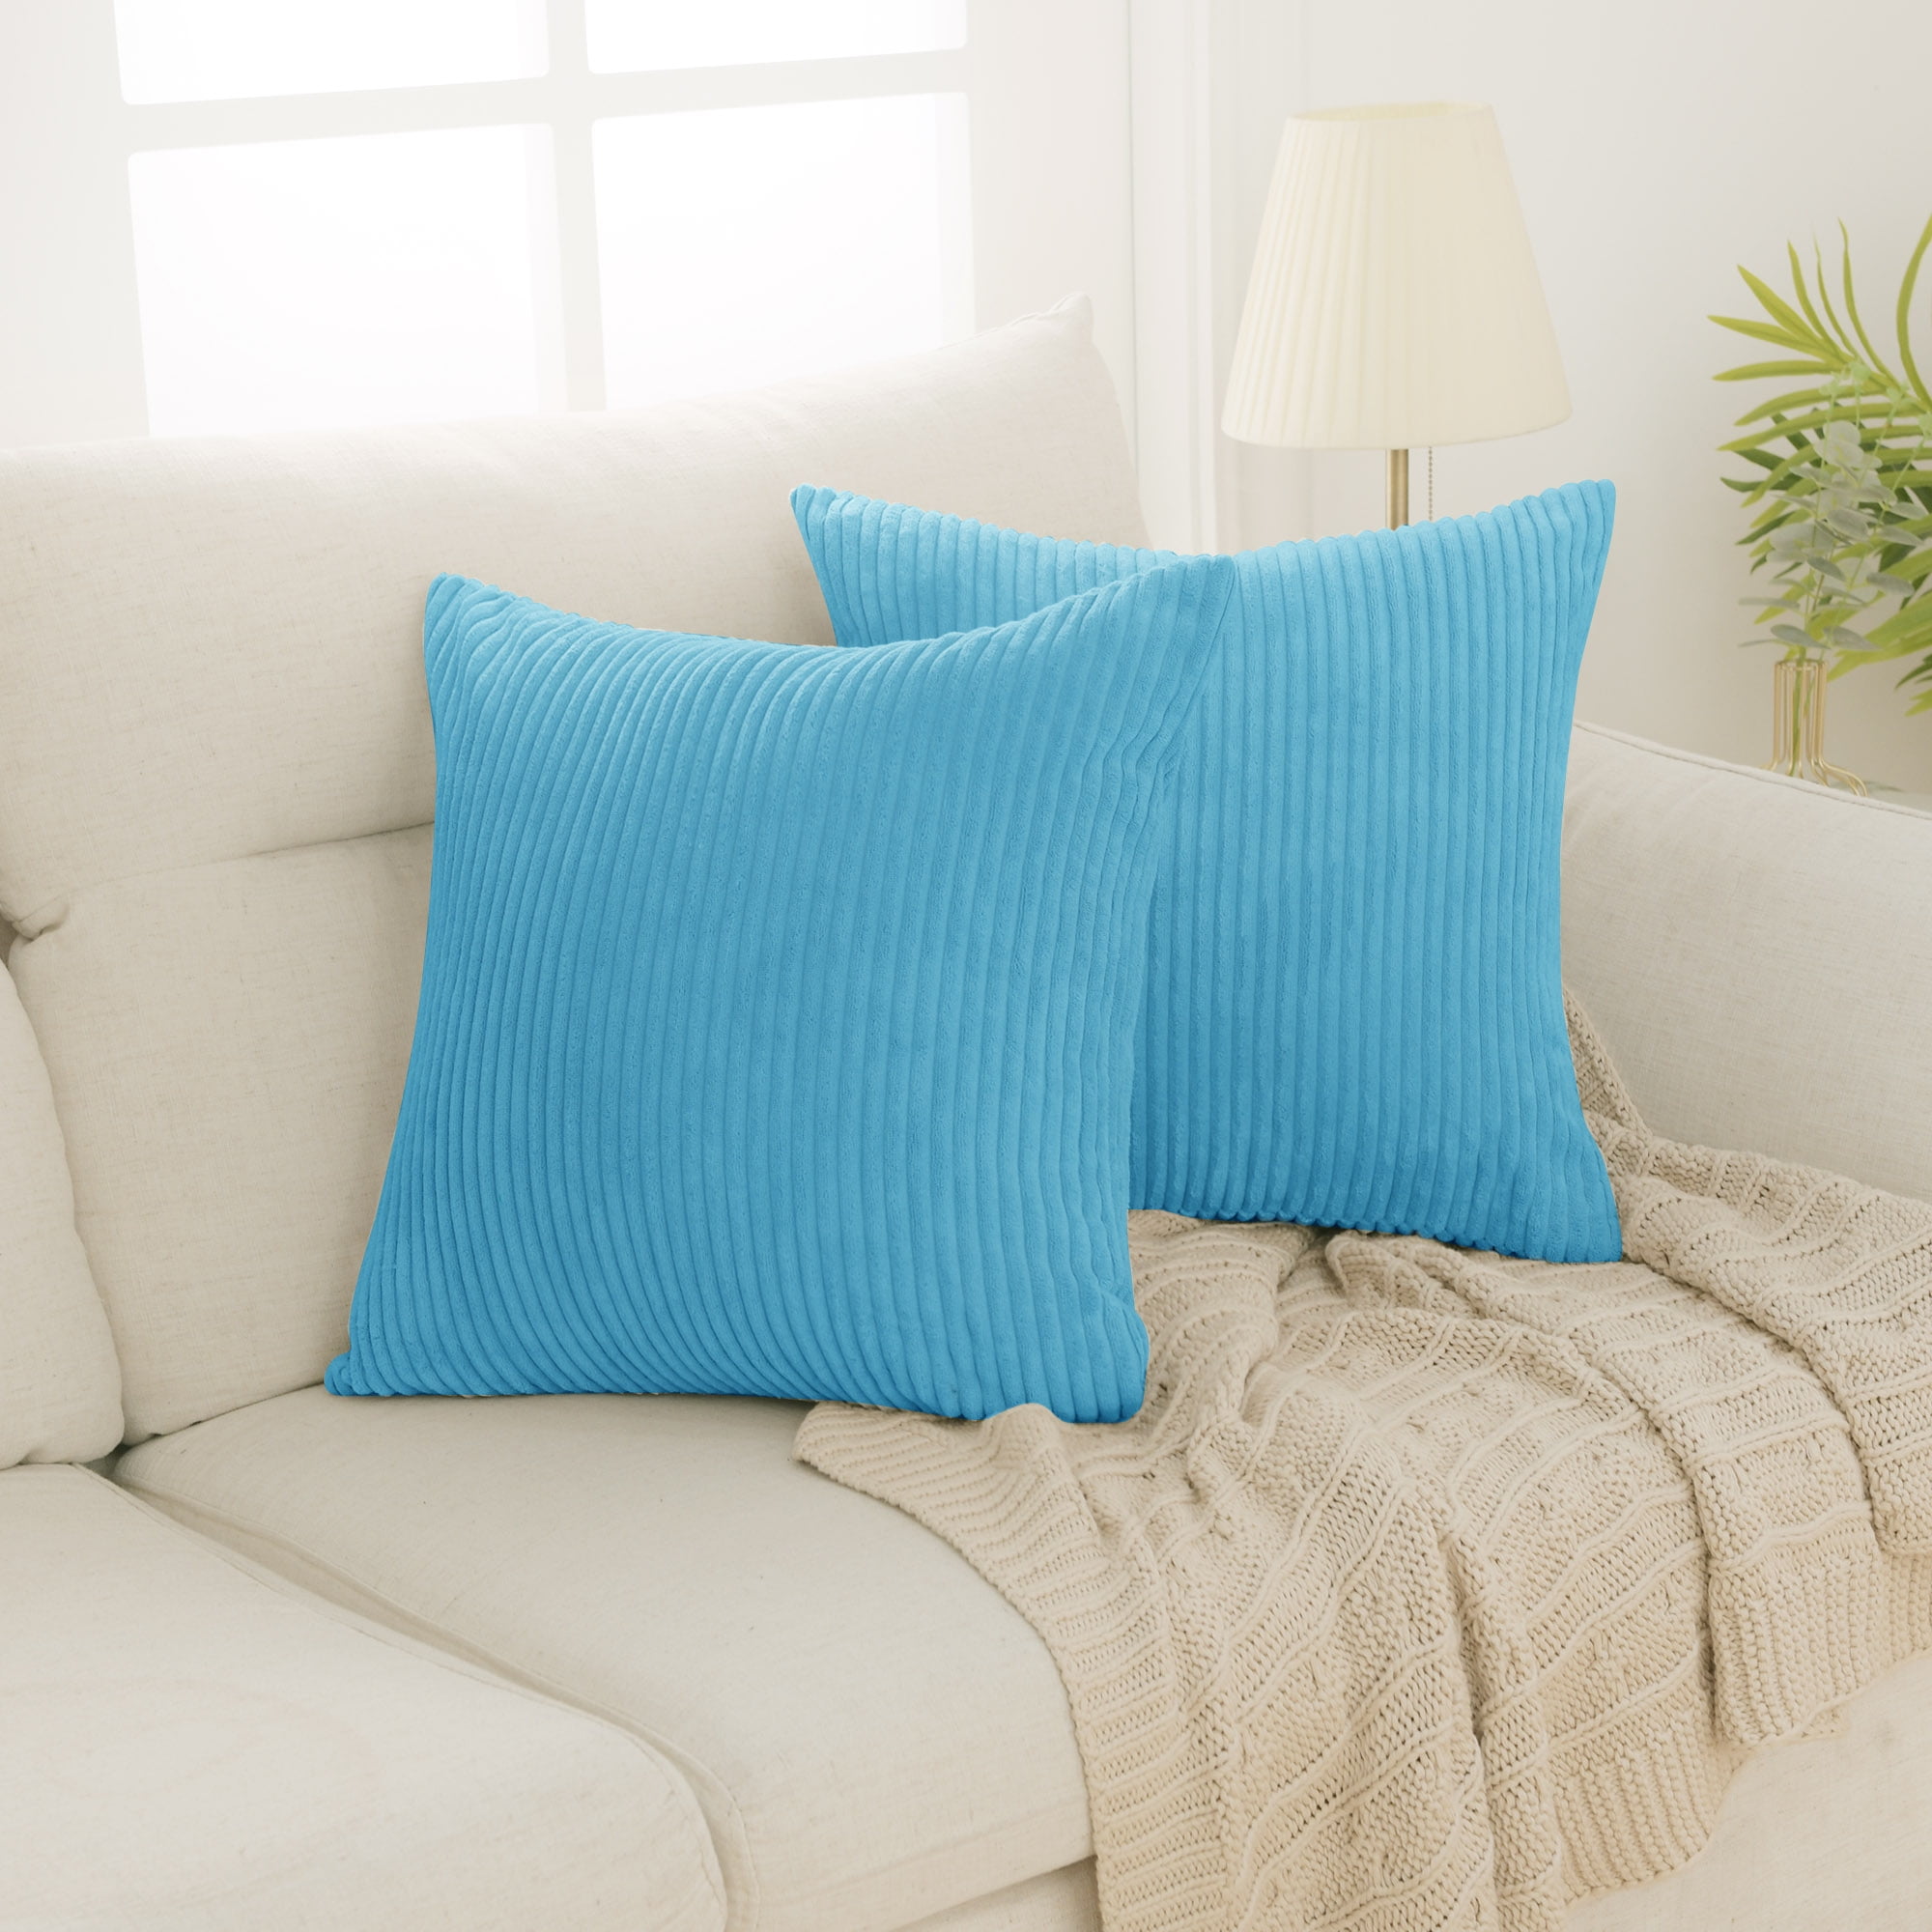 Deconovo Pack of 2 Cushion Cover with Invisible Zipper Baby Blue Super Soft Corduroy Throw Pillow Covers with Stripes for Couch Sofa Bed 22x22 Inch